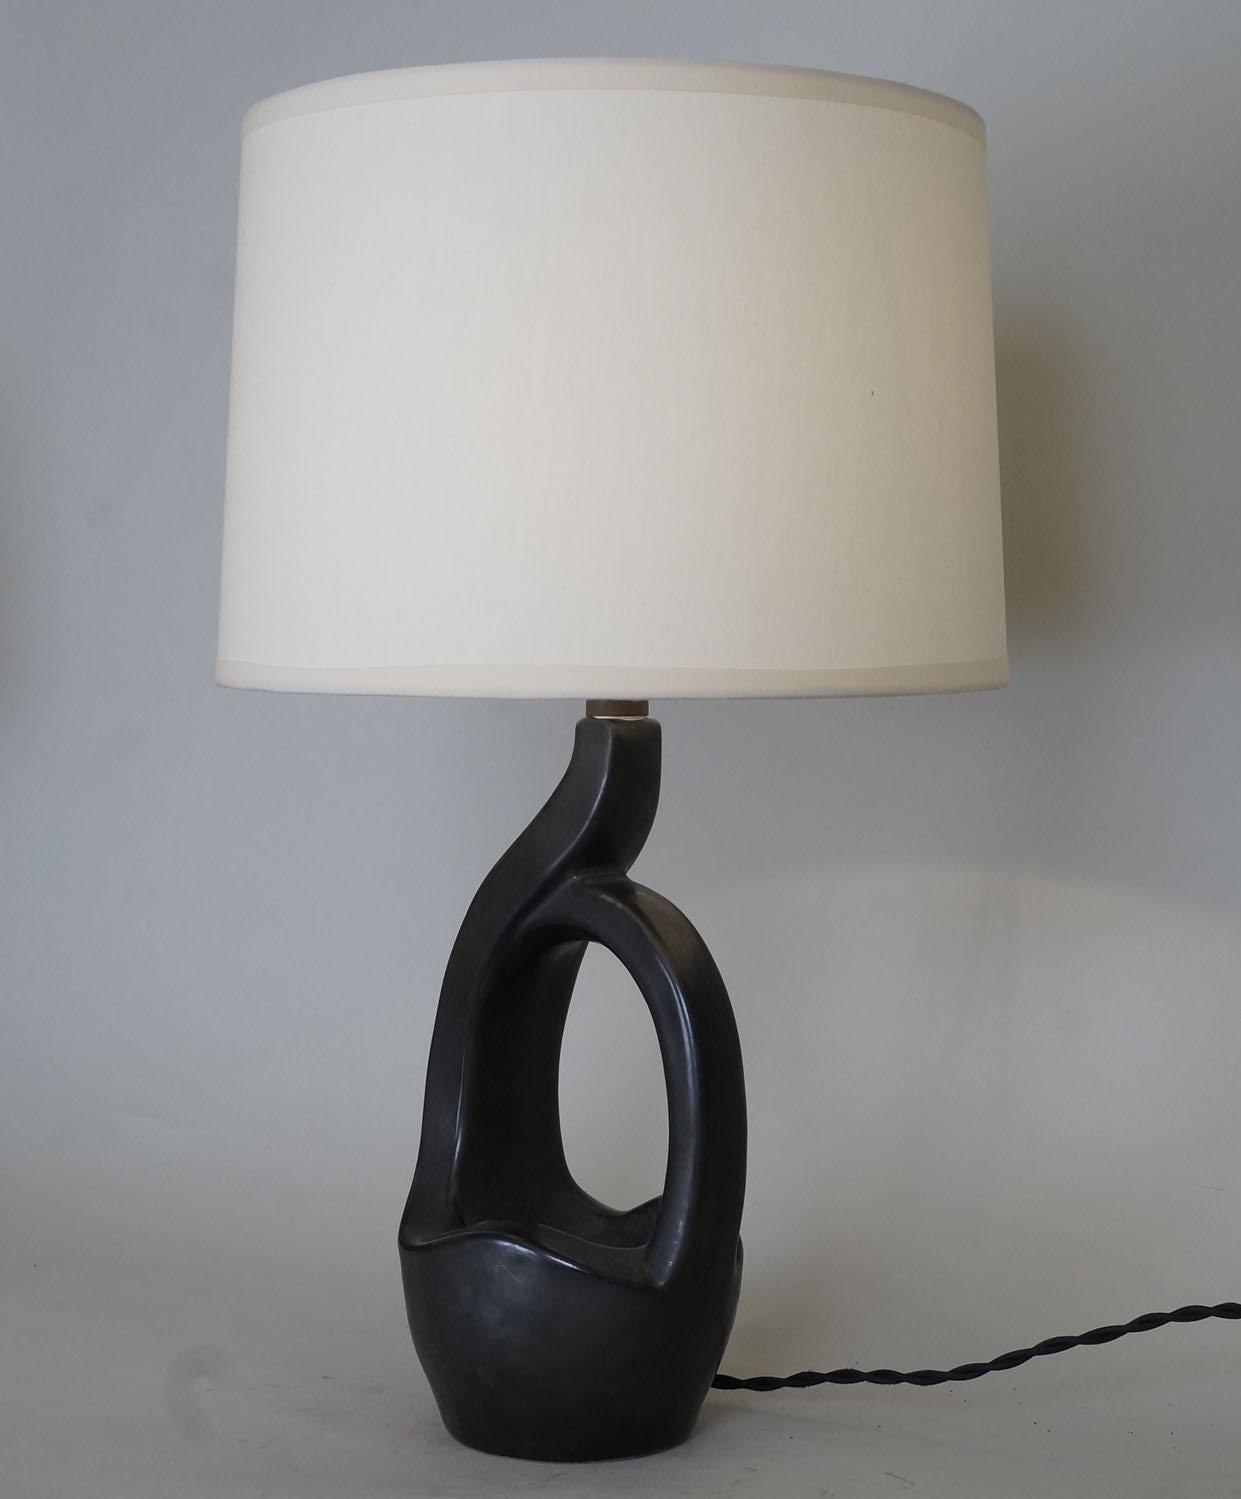 French 20th Century Black Enameled Ceramic Table Lamp For Sale